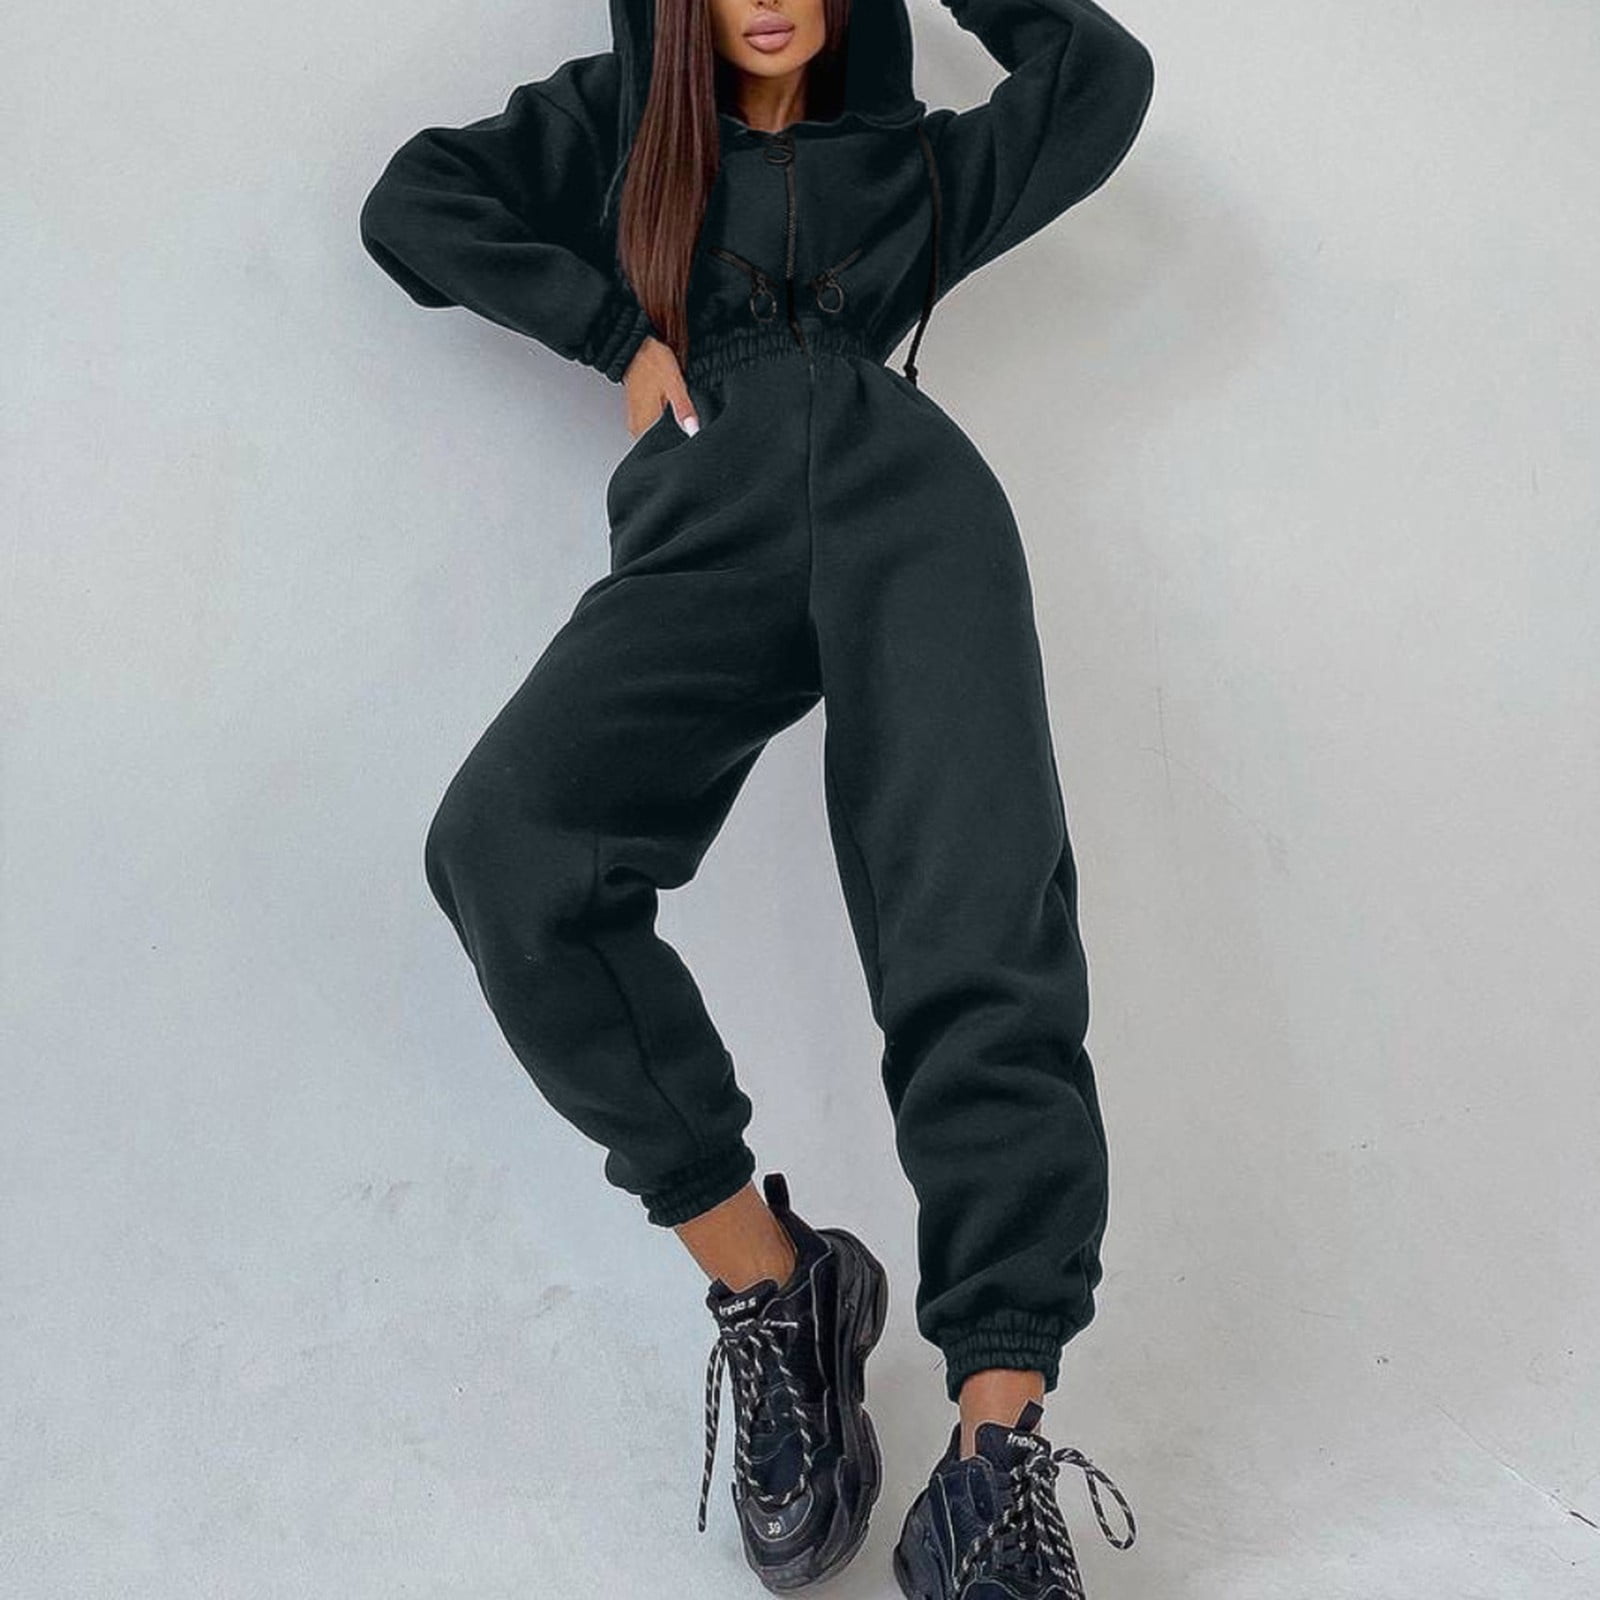 WANYNG jumpsuits for women Hoodies Suit Winter Spring Solid Casual  Tracksuit 2 Pieces Set Sports Sweatshirts Pullover Home Sweatpants Outfits  pants for women Gray XL 